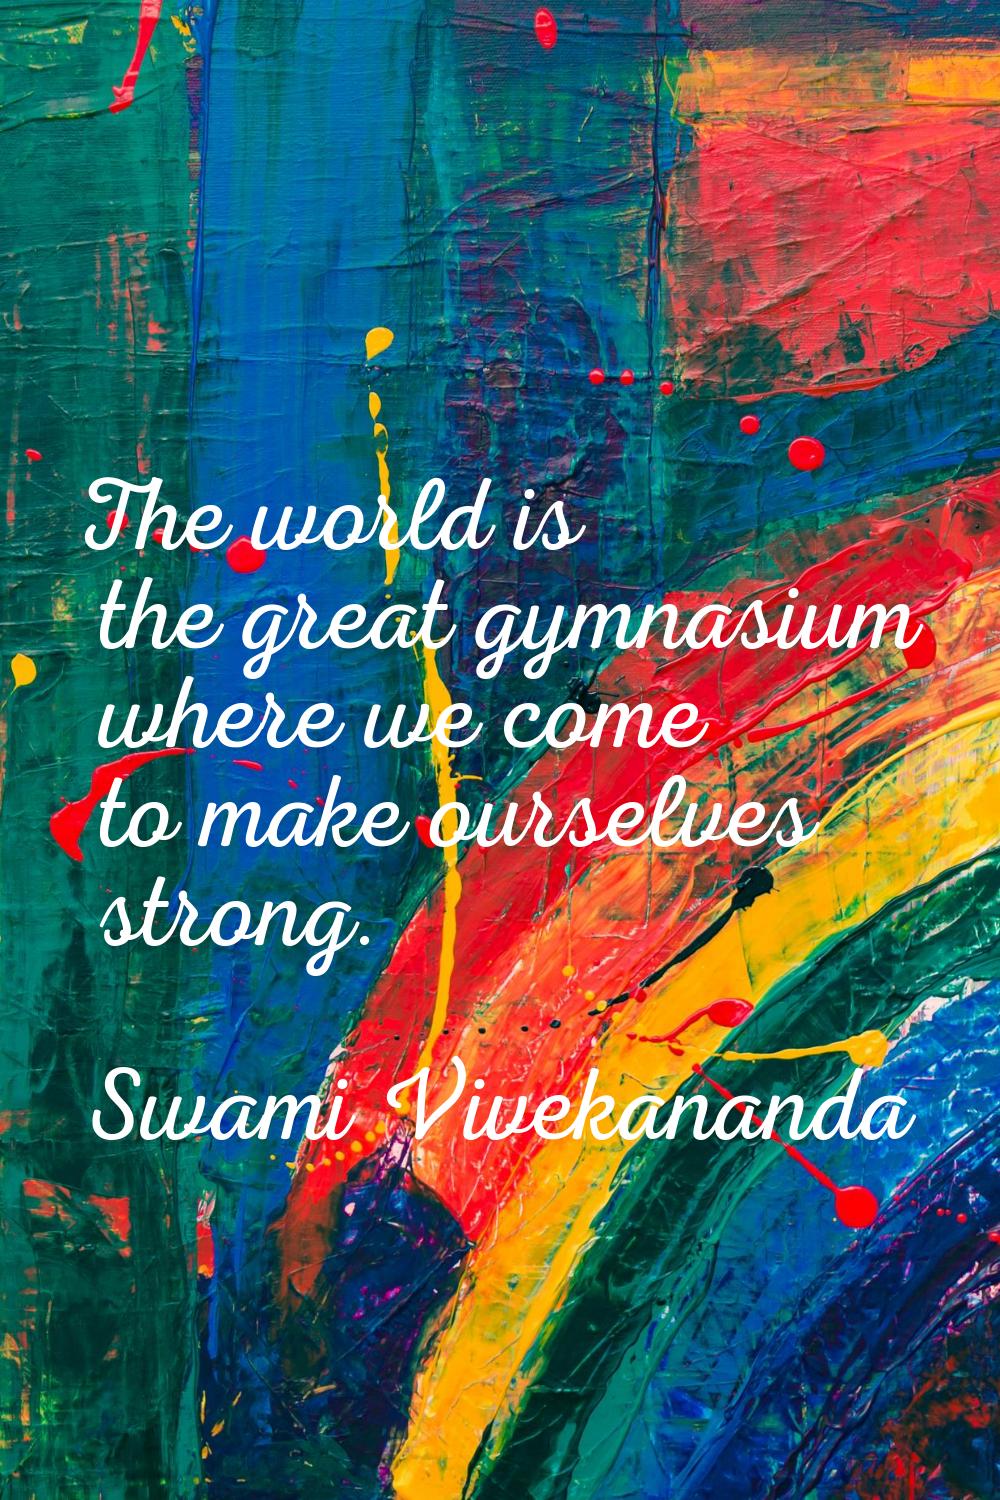 The world is the great gymnasium where we come to make ourselves strong.